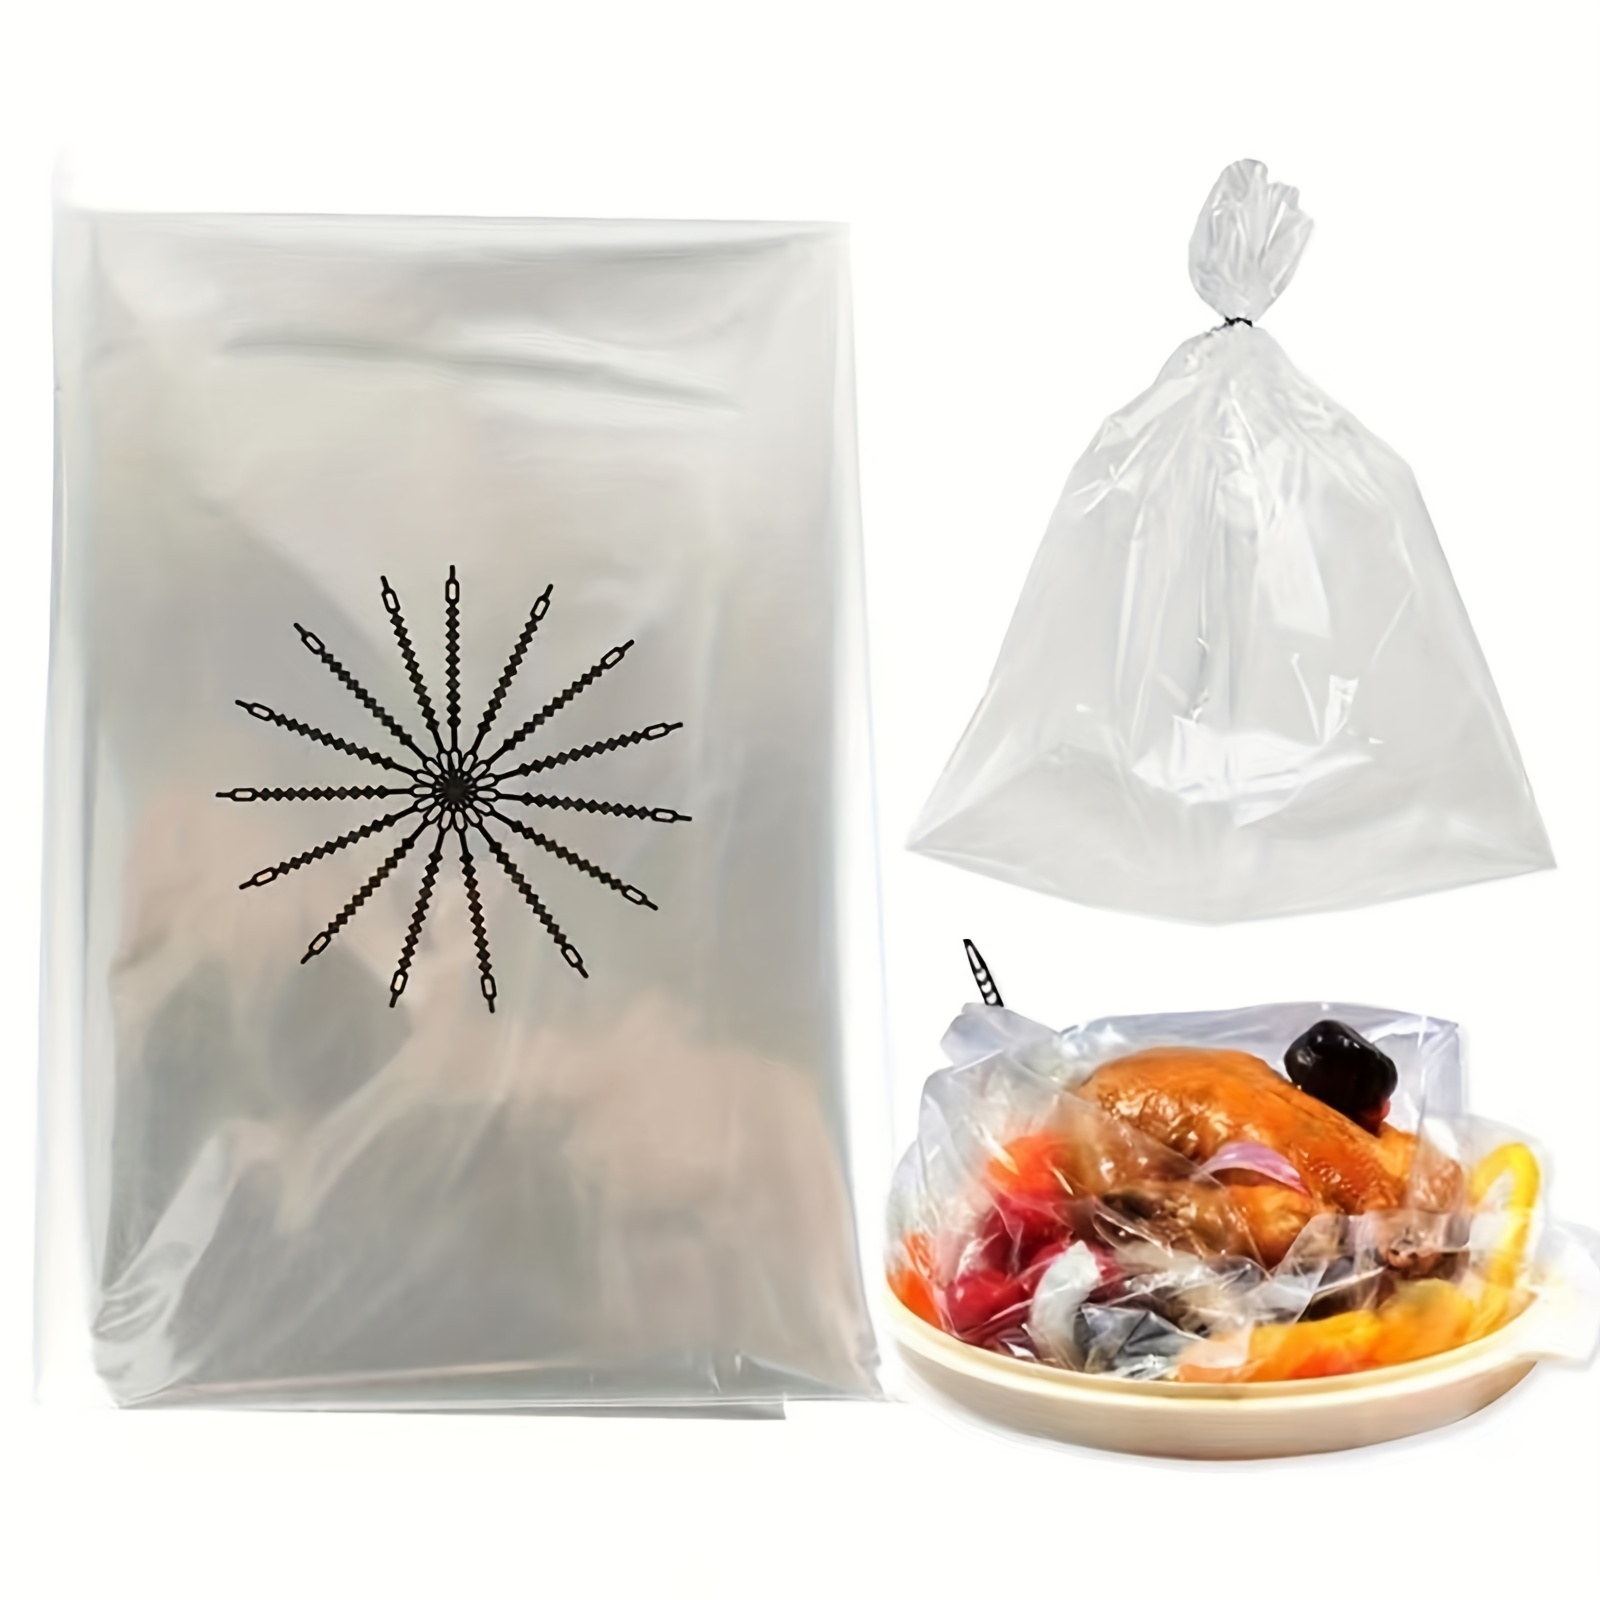 20pcs, Oven Bags For Cooking, Meat Baking Bags, Meat Chicken Fish  Vegetables Large Baking Bags, Cooking Meat In Kitchen Microwave, Summer  Decoration